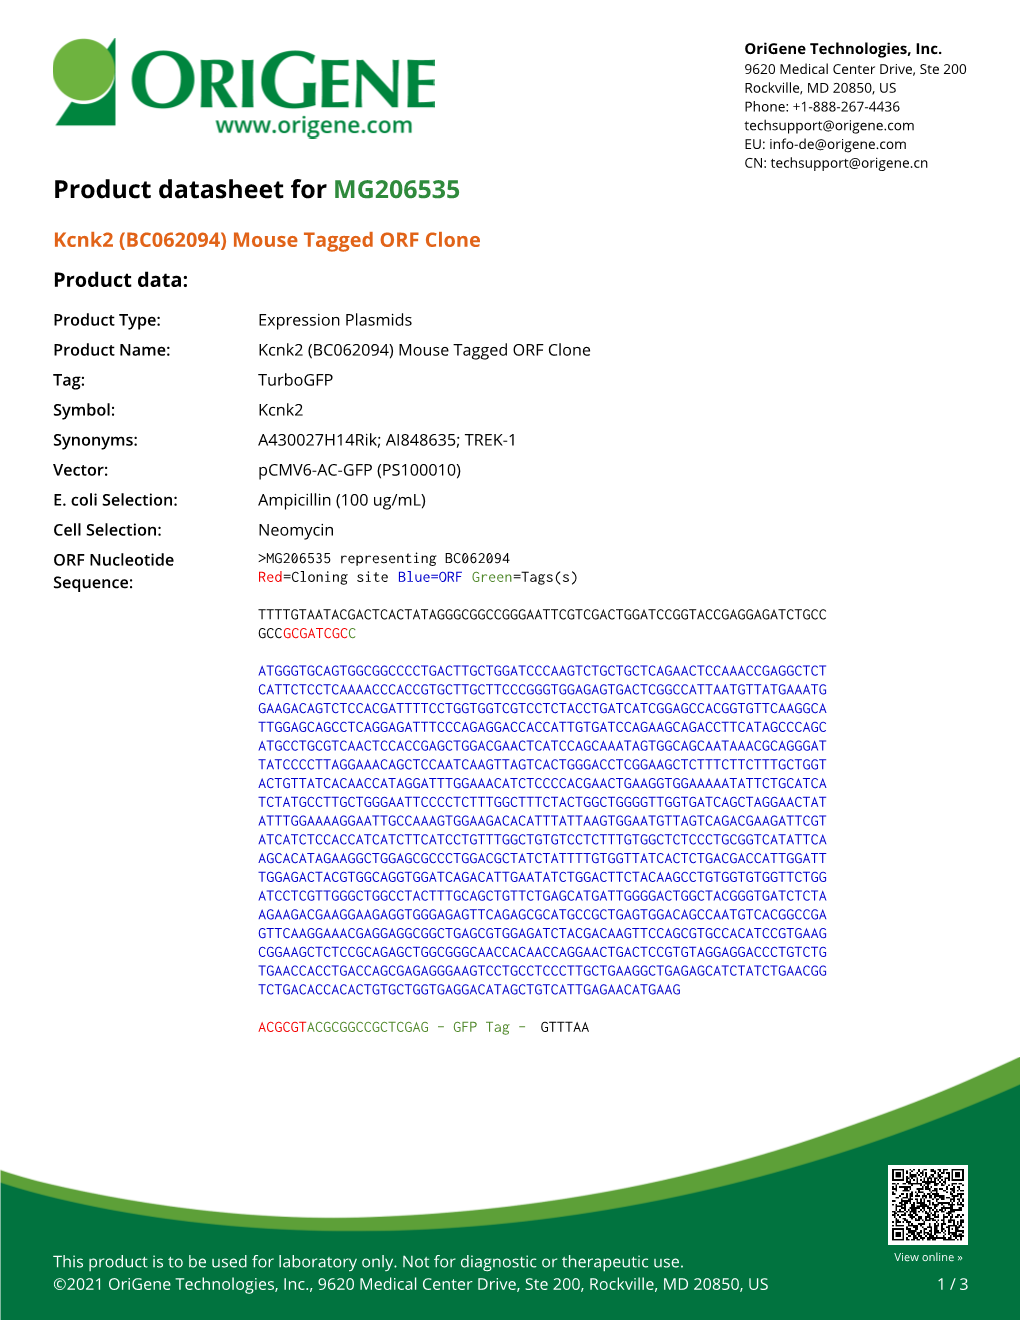 Kcnk2 (BC062094) Mouse Tagged ORF Clone – MG206535 | Origene